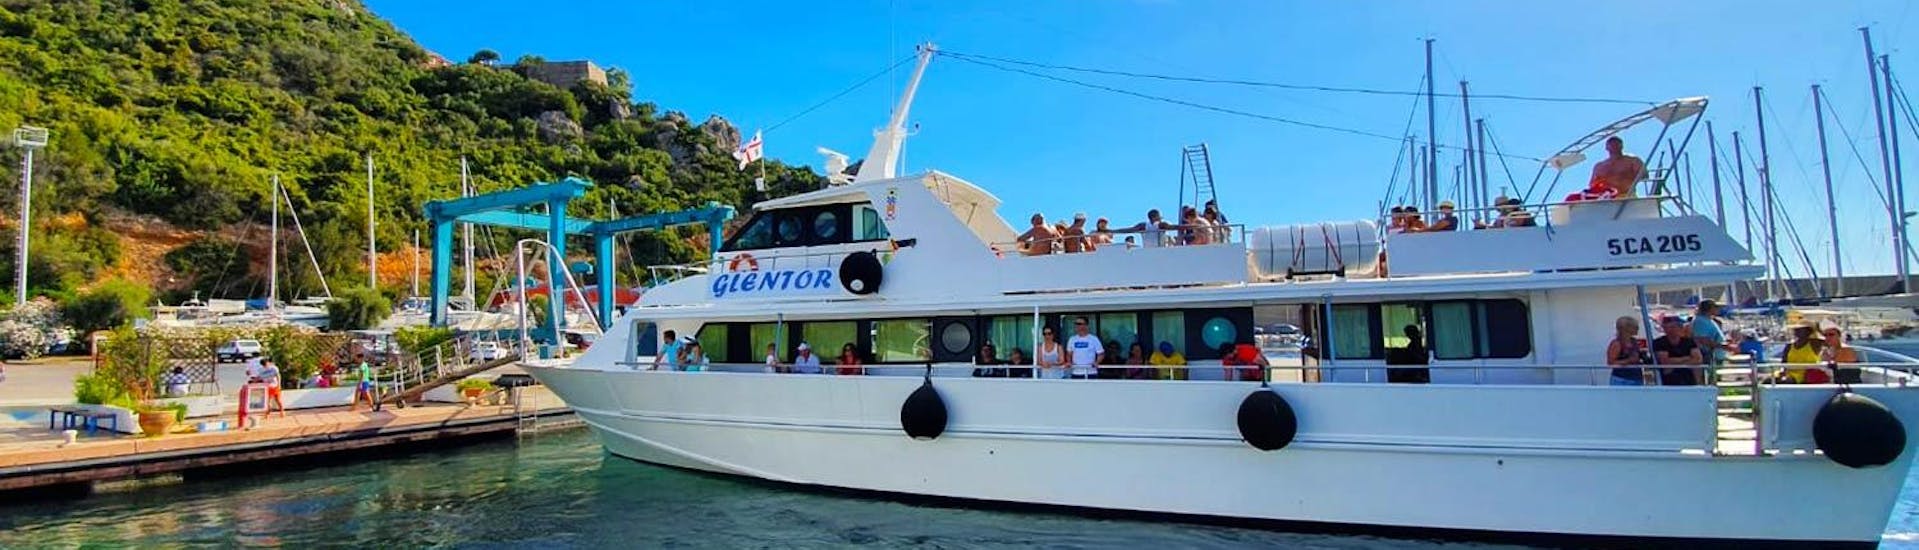 Photo of our motor ship Glentor during a boat trip with Escursioni Glentor Arbatax.